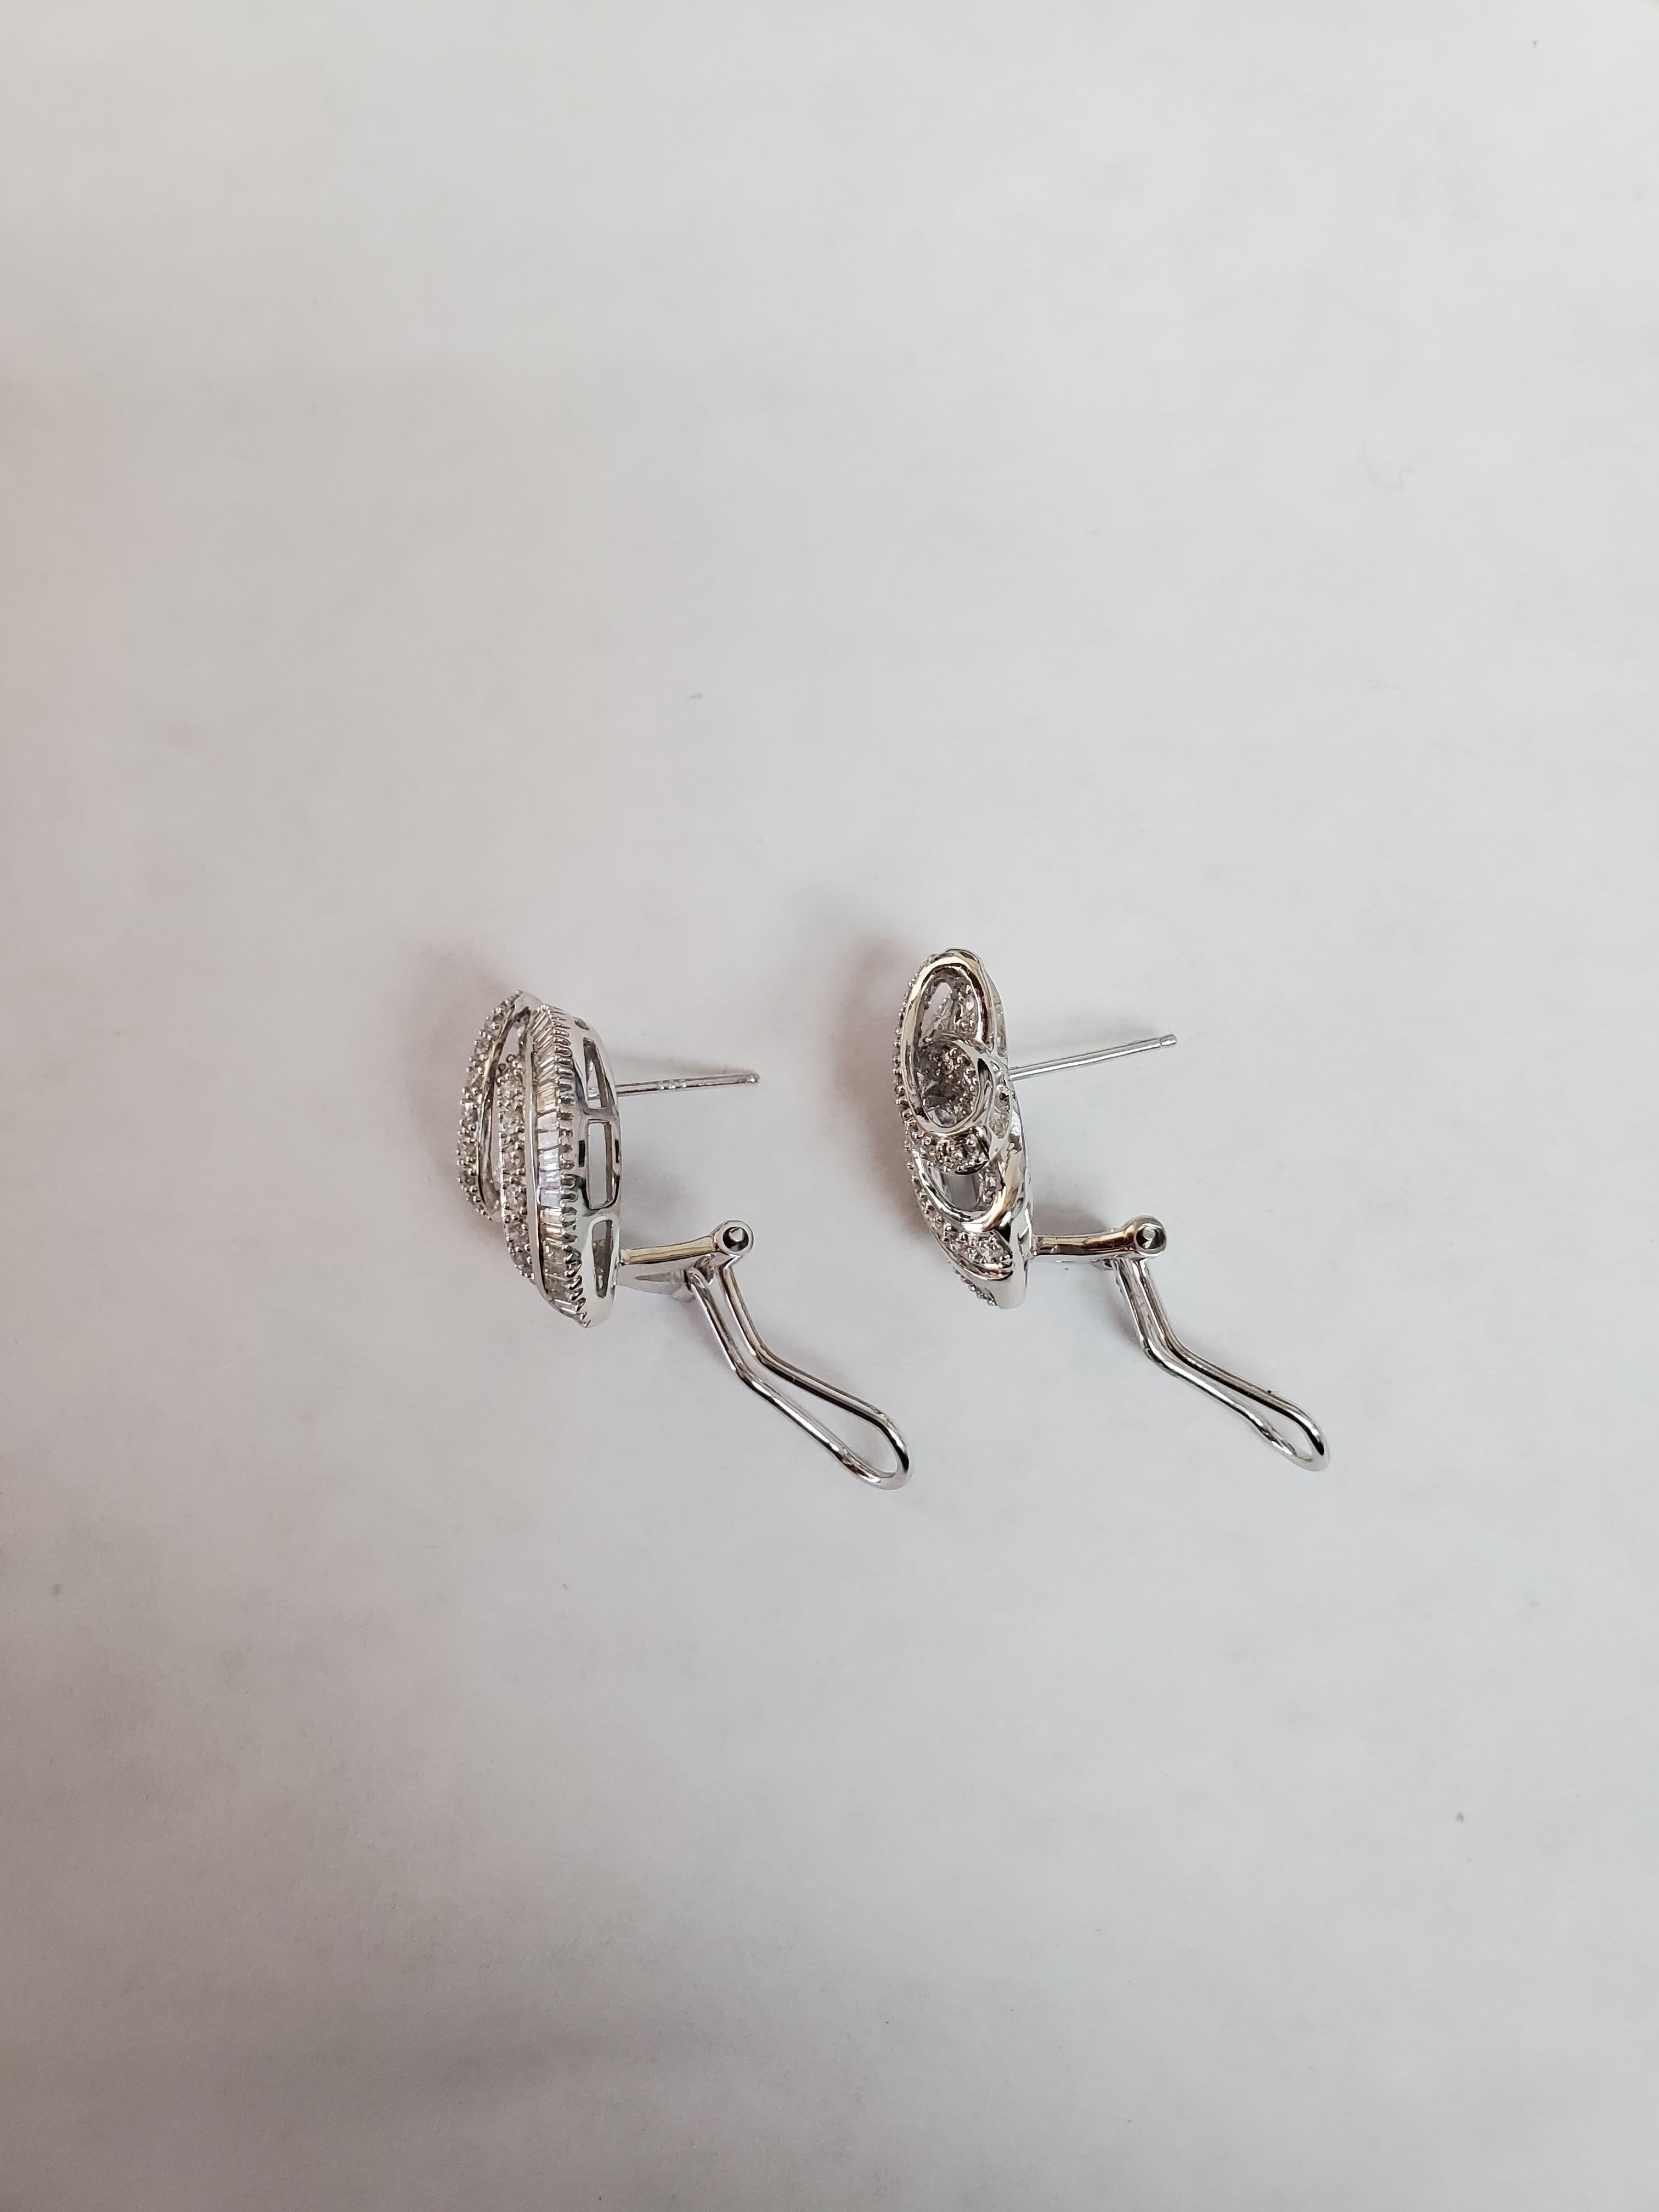 Pave Diamond Baguette Diamond Earrings 1.22cttw 14k White Gold In New Condition For Sale In Sugar Land, TX